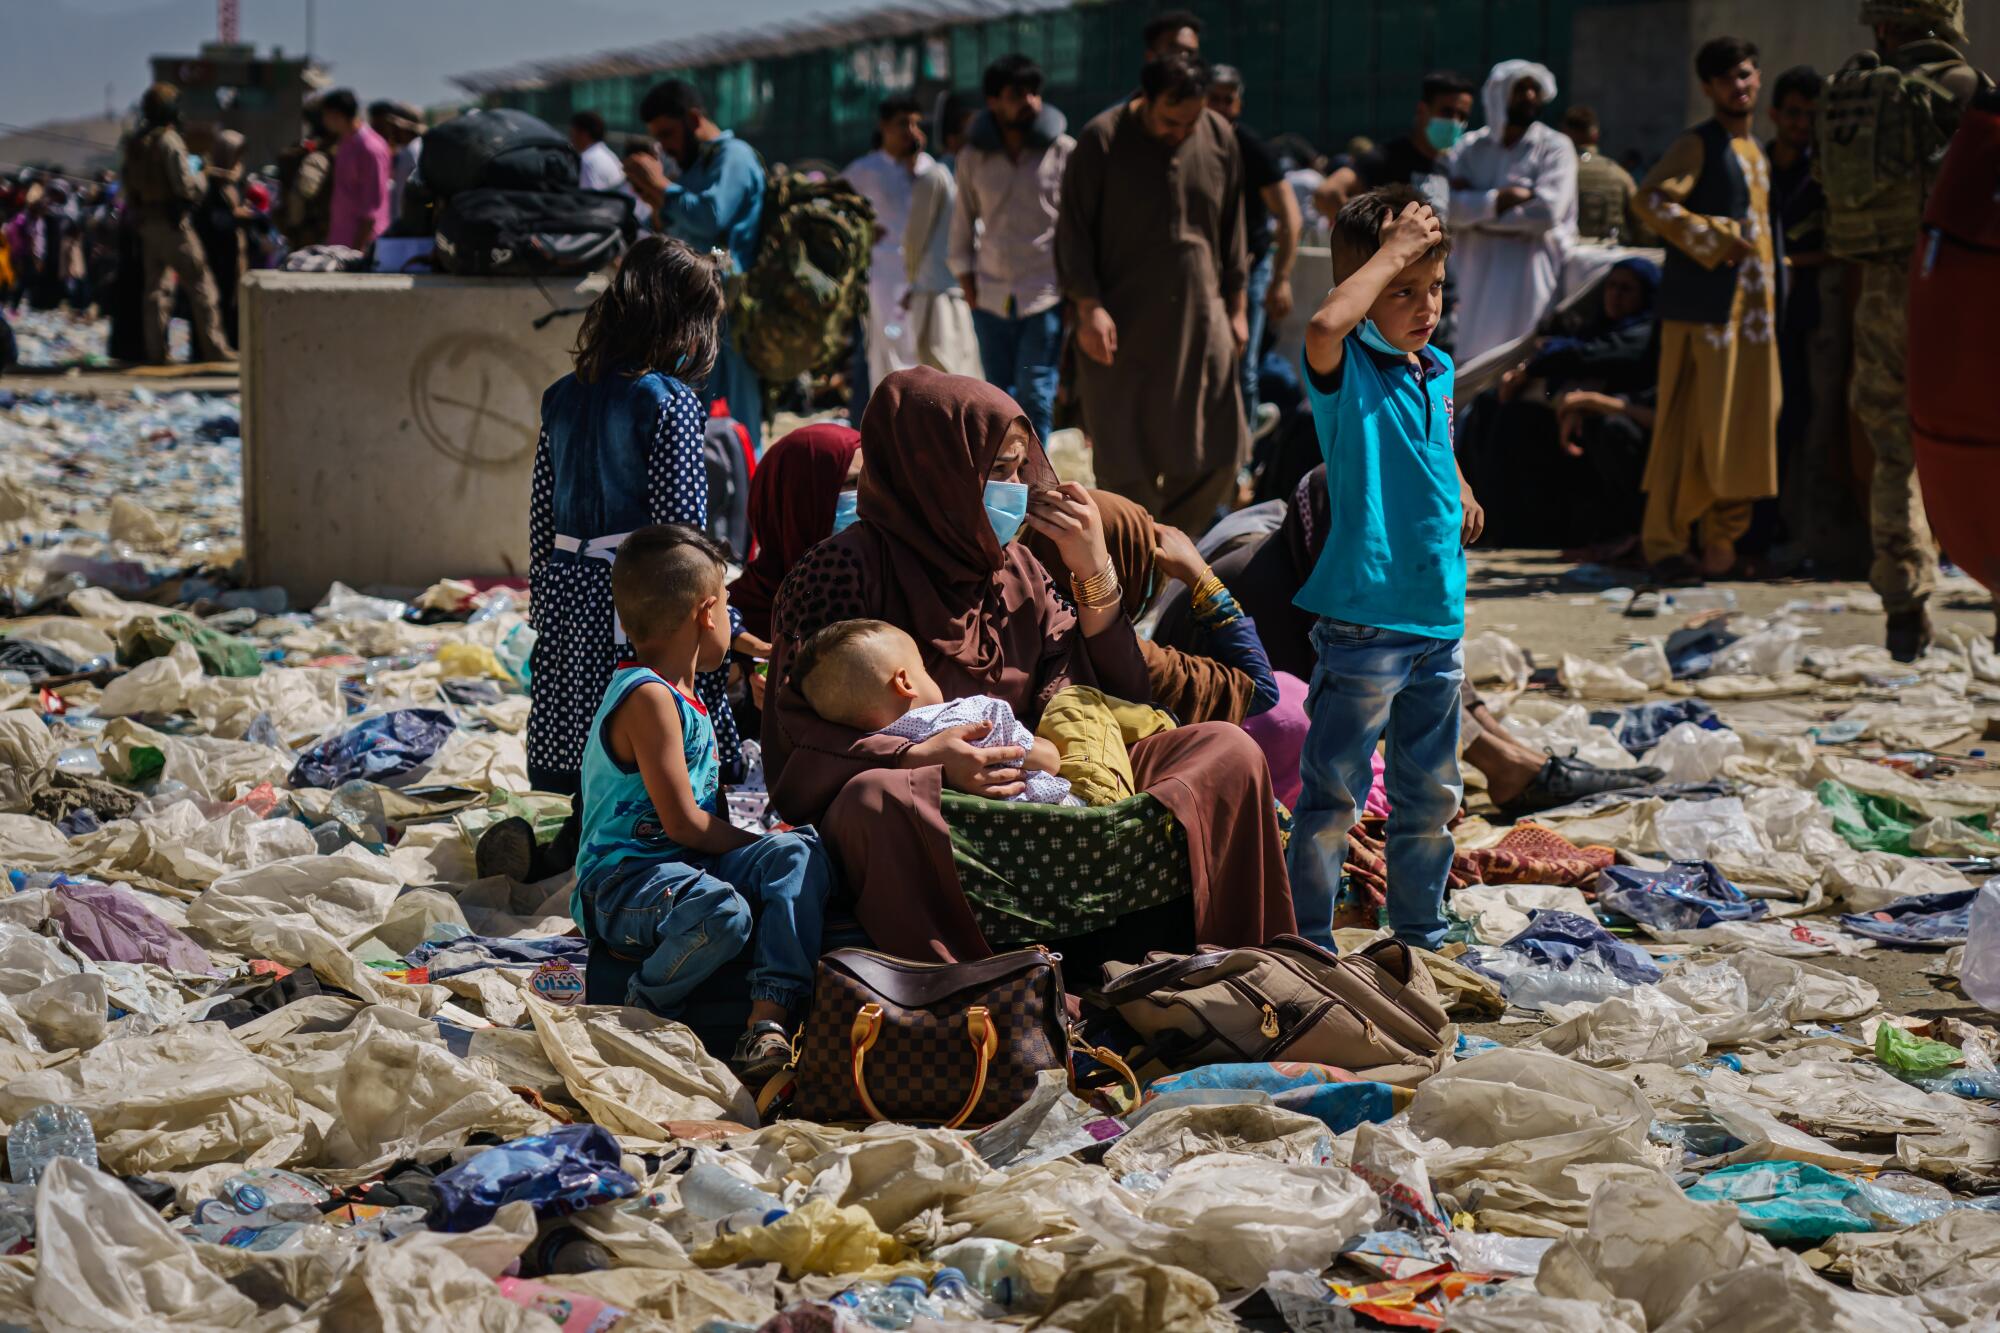 A woman is surrounded by her children as she sits amidst a pile of debris.